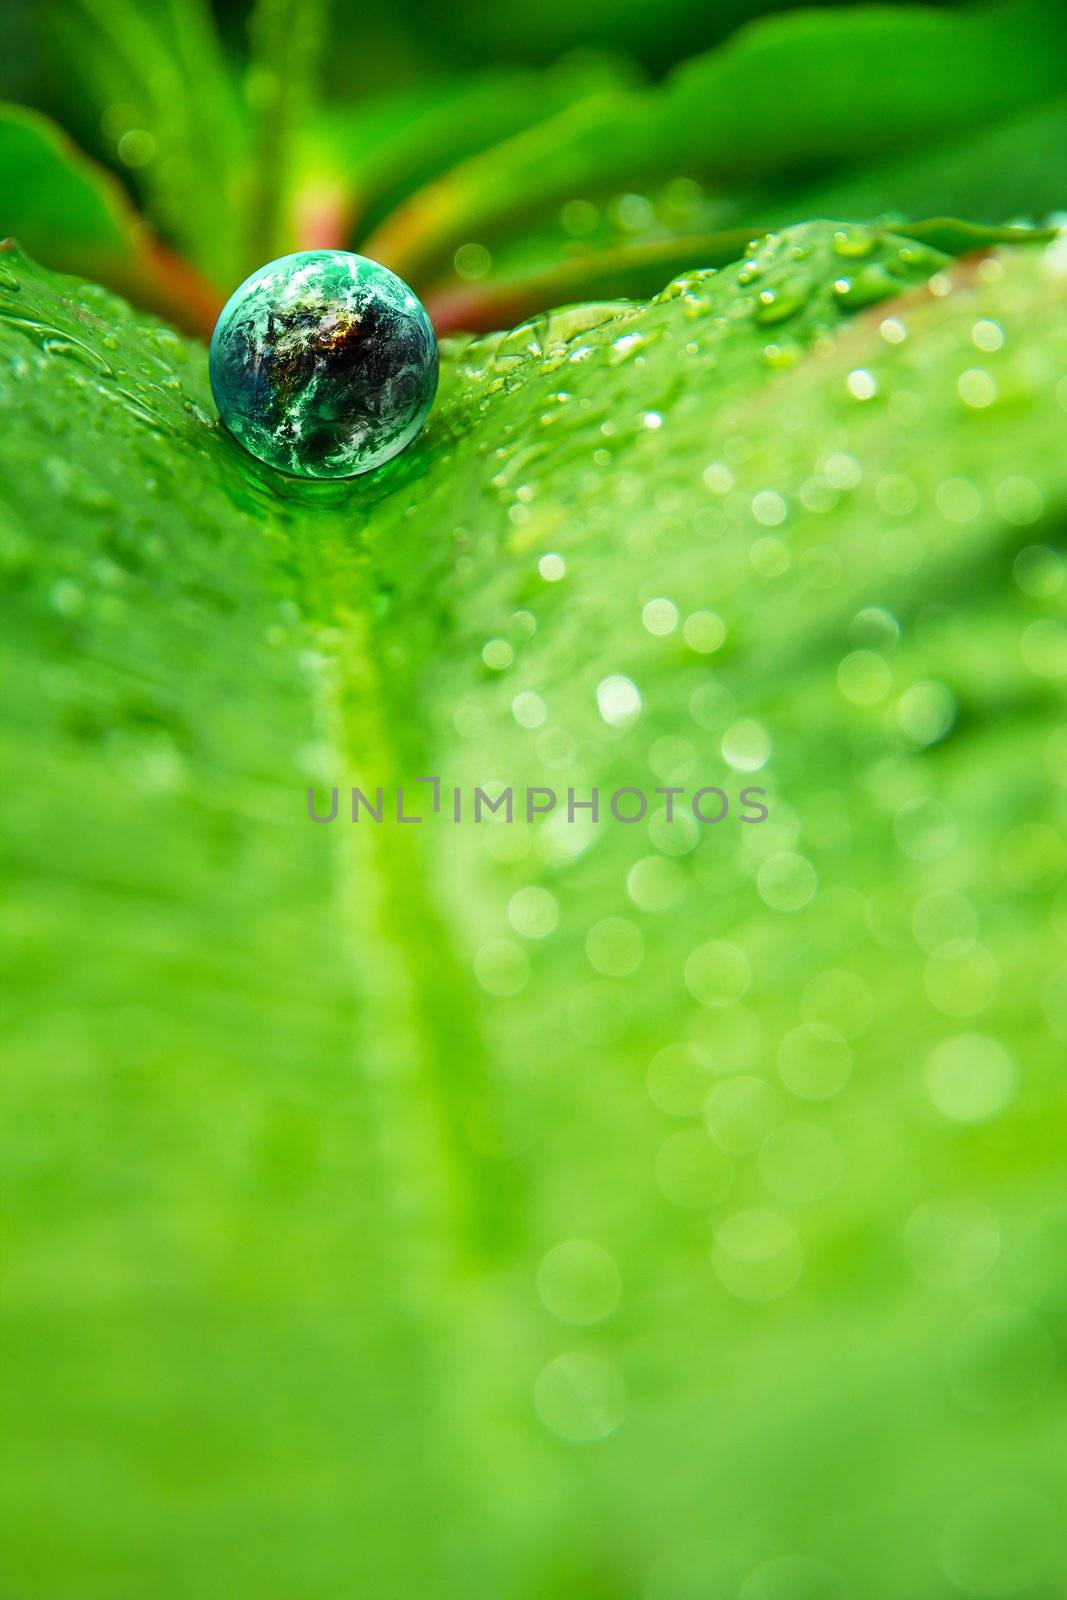 abstract image of small world in nature